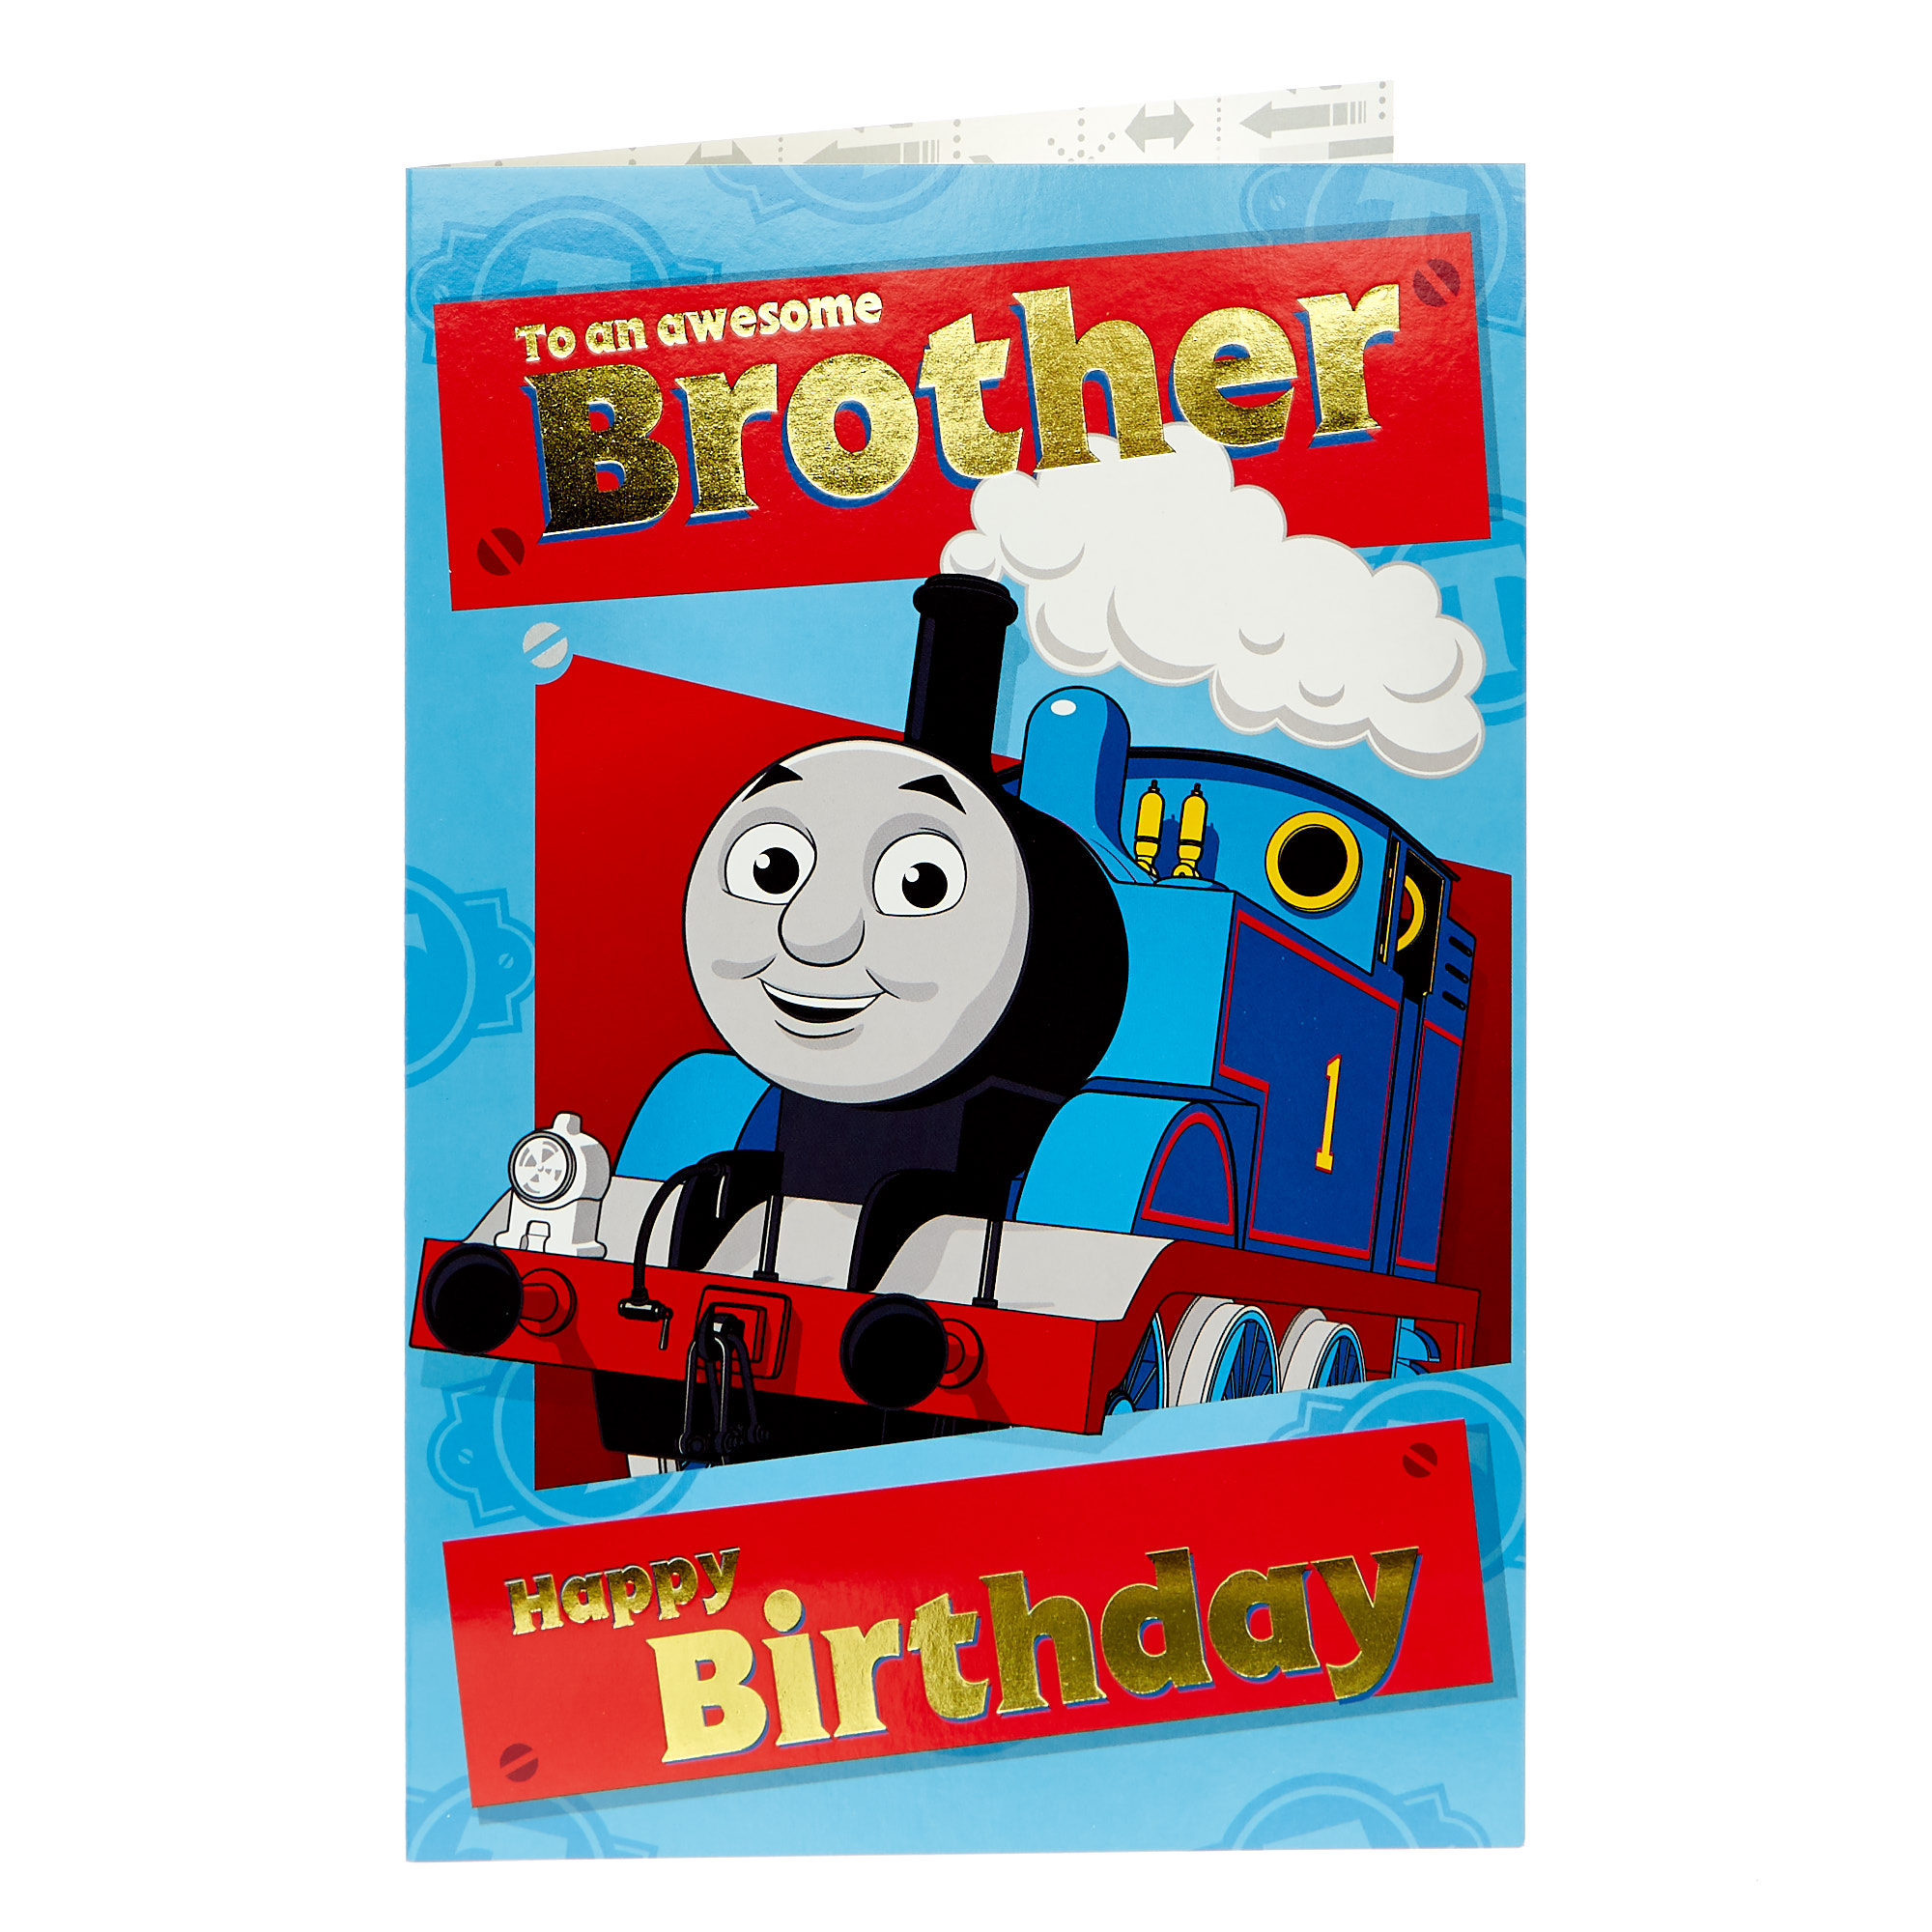 Buy Thomas & Friends Birthday Card - Brother for GBP 0.99 | Card Factory UK